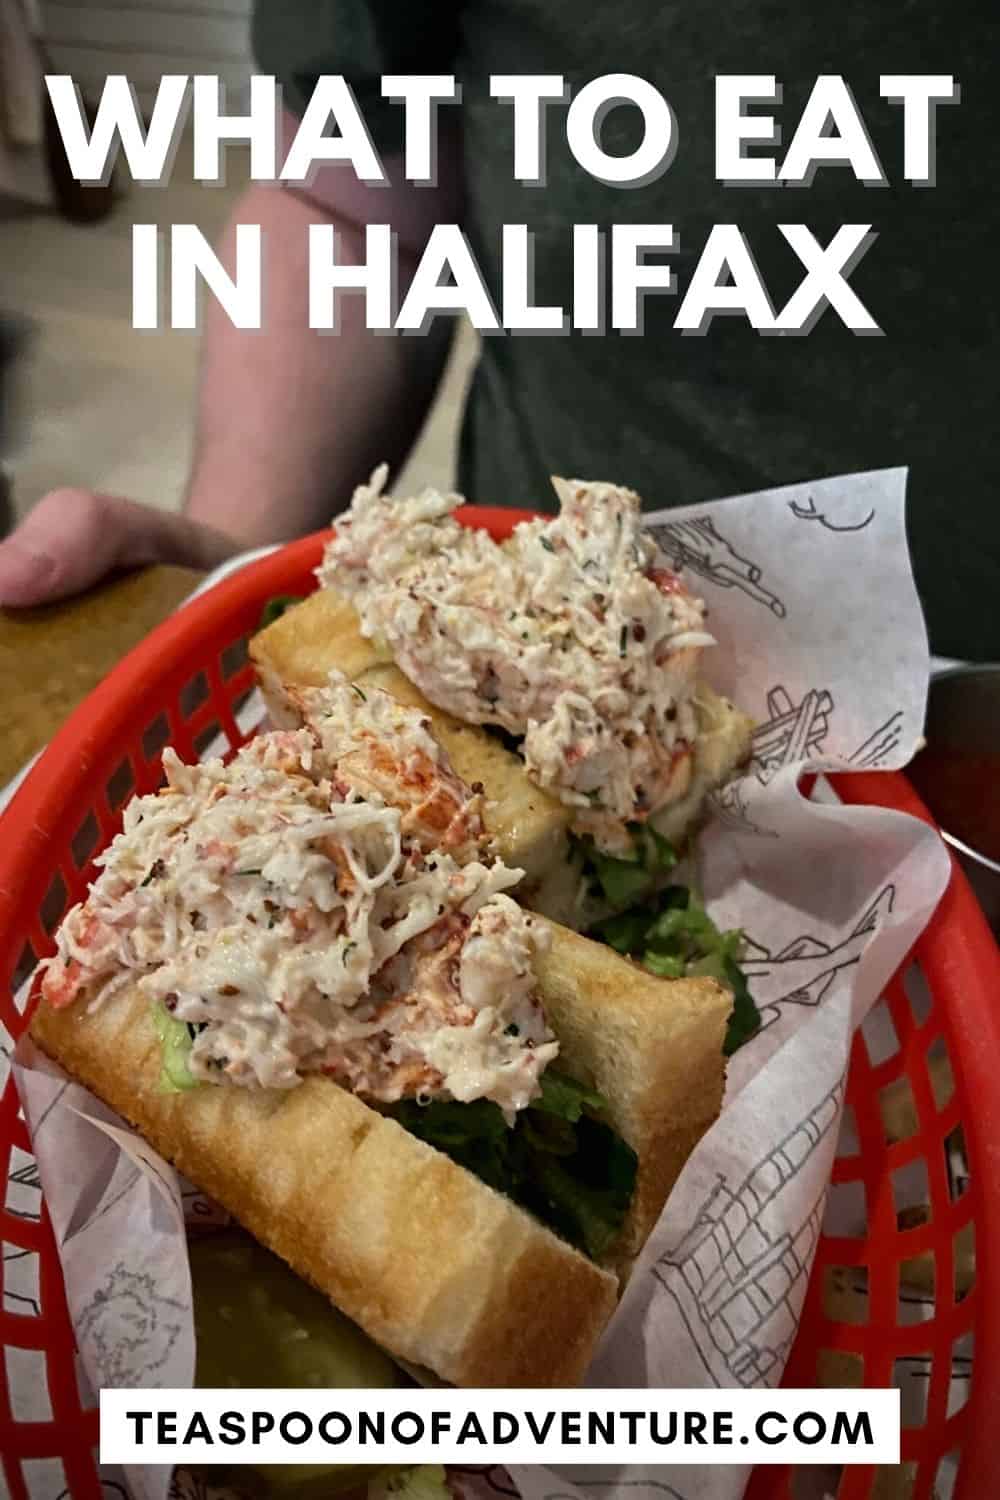 WHERE TO EAT IN HALIFAX, NOVA SCOTIA! Halifax, Canada is a foodie destination that should be on your travel list. Check out 14 things to eat in Halifax including lobster pasta, donair, chocolates and more! #foodie #seafood #chocolate #halifax #travel #novascotia #peggyscove #canada